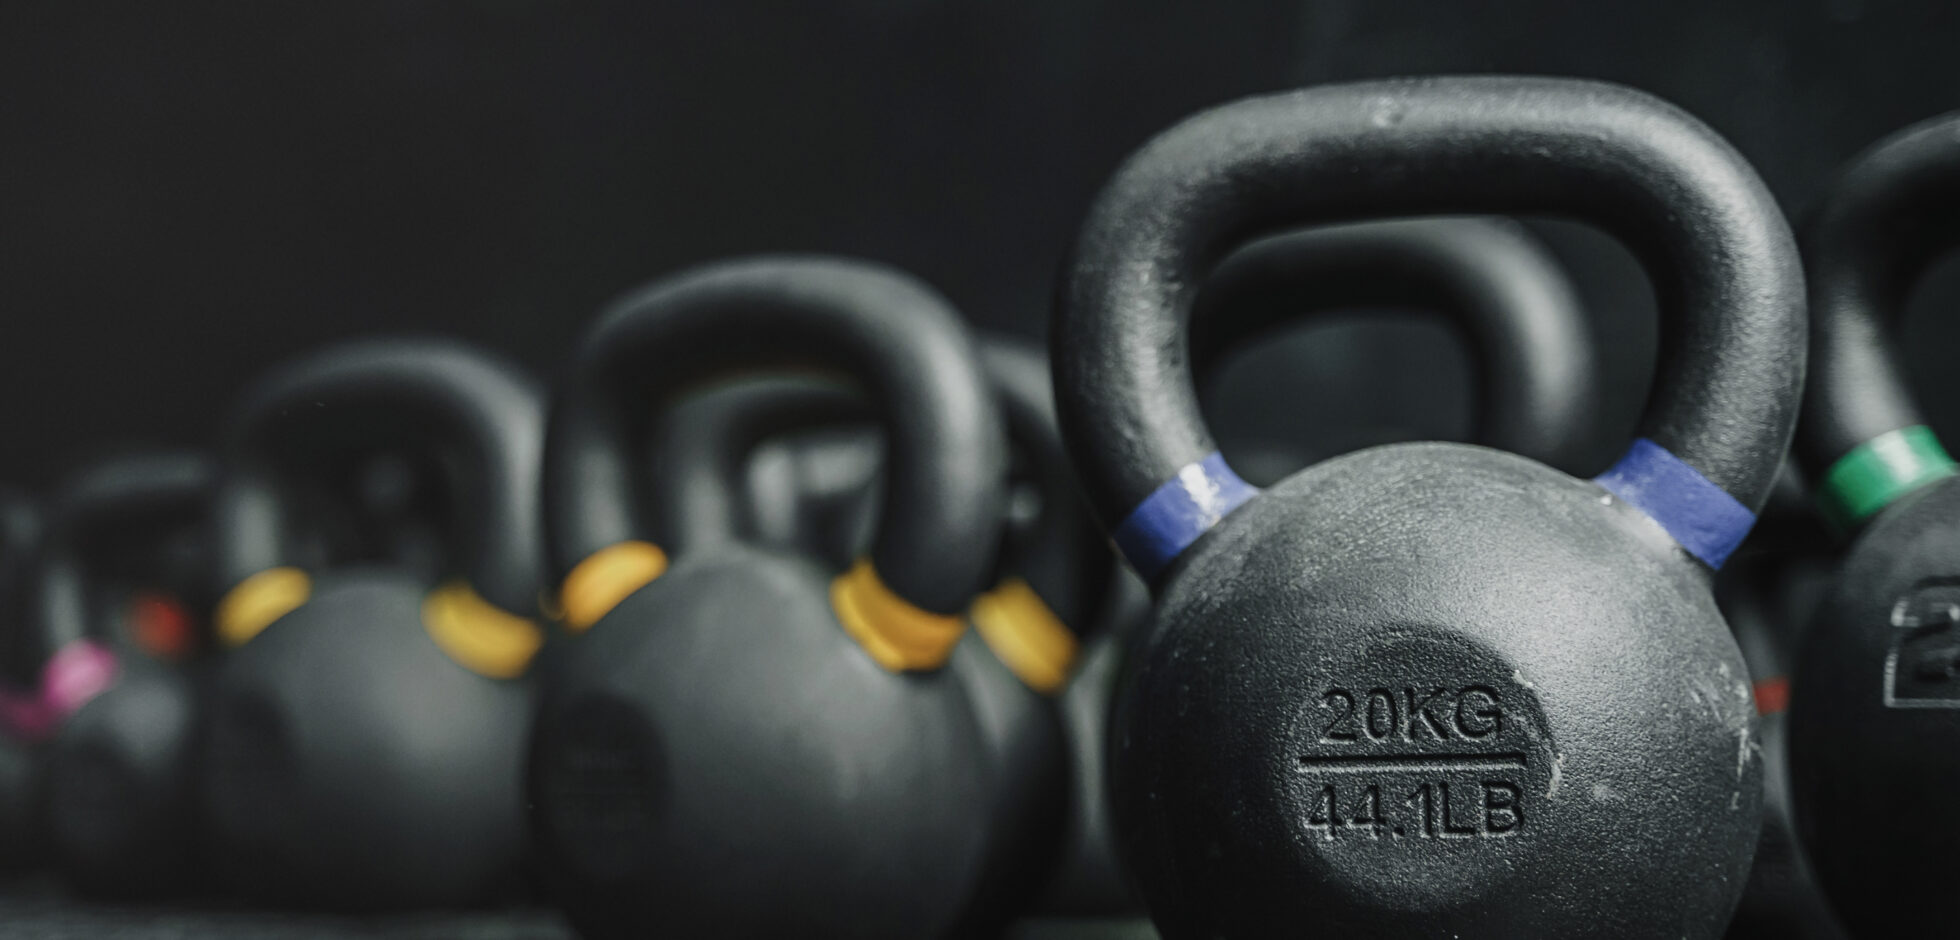 Kettle bell set at top rated gym near me